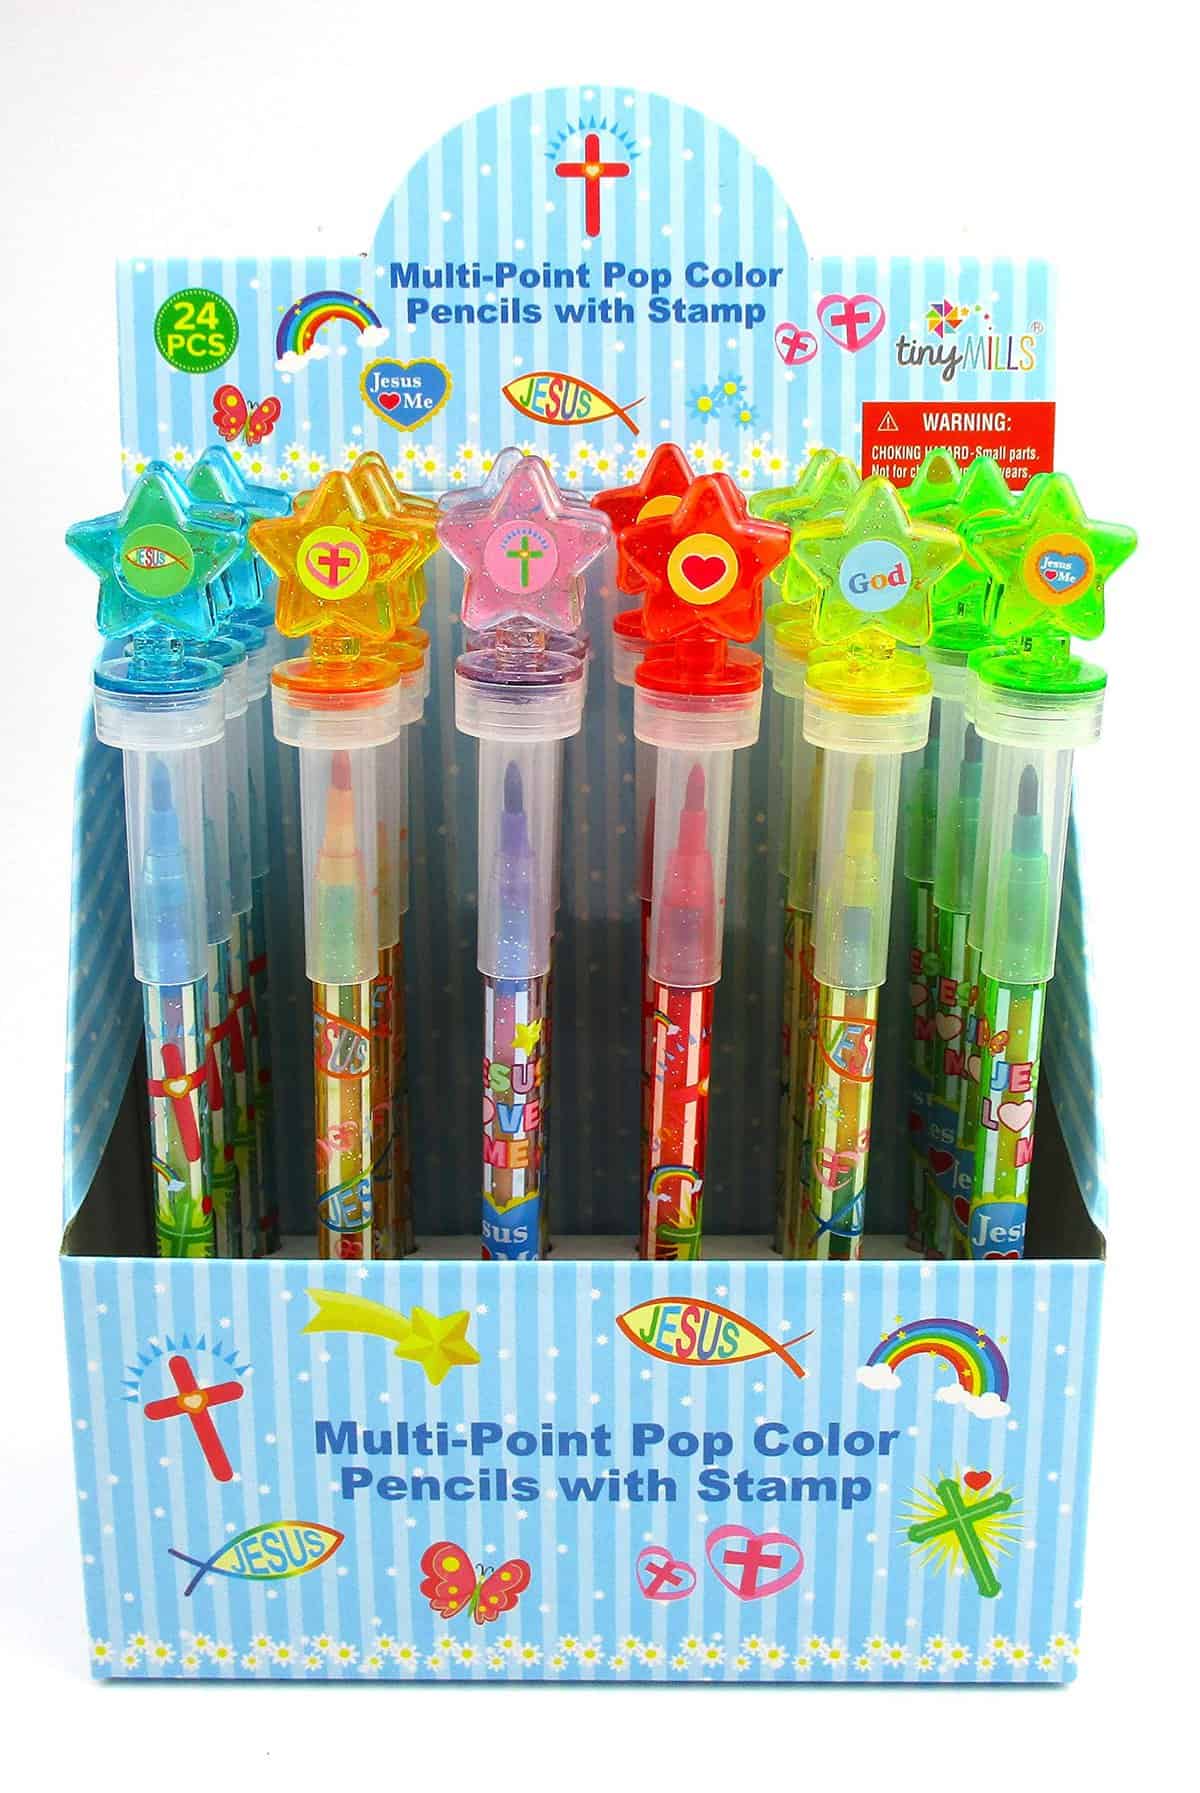 TINYMILLS 24 Pcs Religious Christian 2 in 1 Stackable Stacking Crayon with Extra Stamper Topper